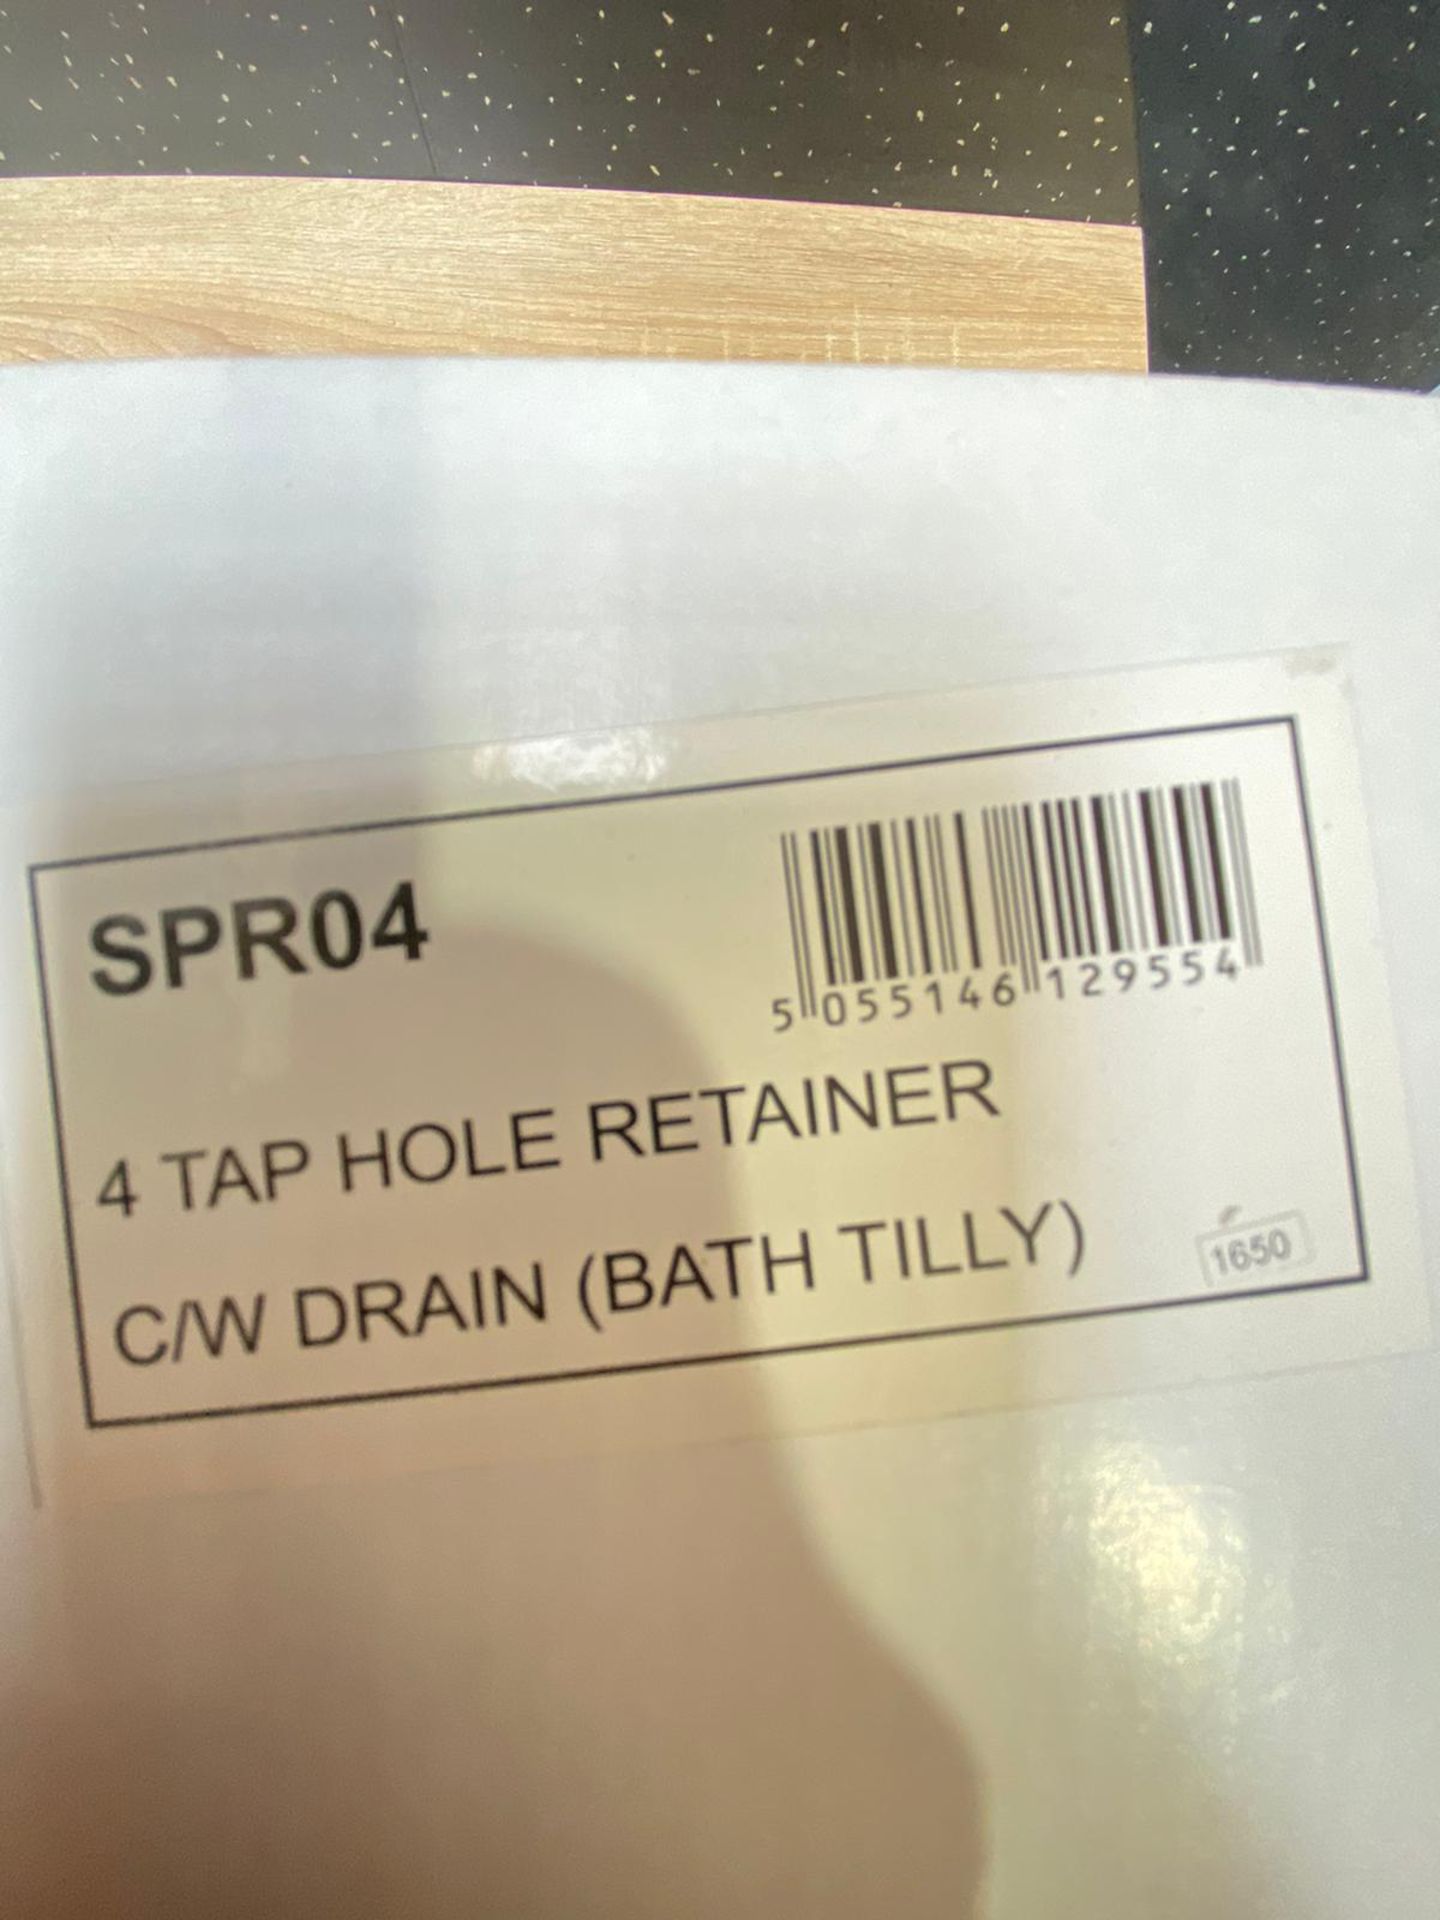 1 x 4-Tap Hole Retainer  - Product Code: SPR04 - New Boxed Stock - CL545 - Ref: Pallet JB2 - Image 2 of 2